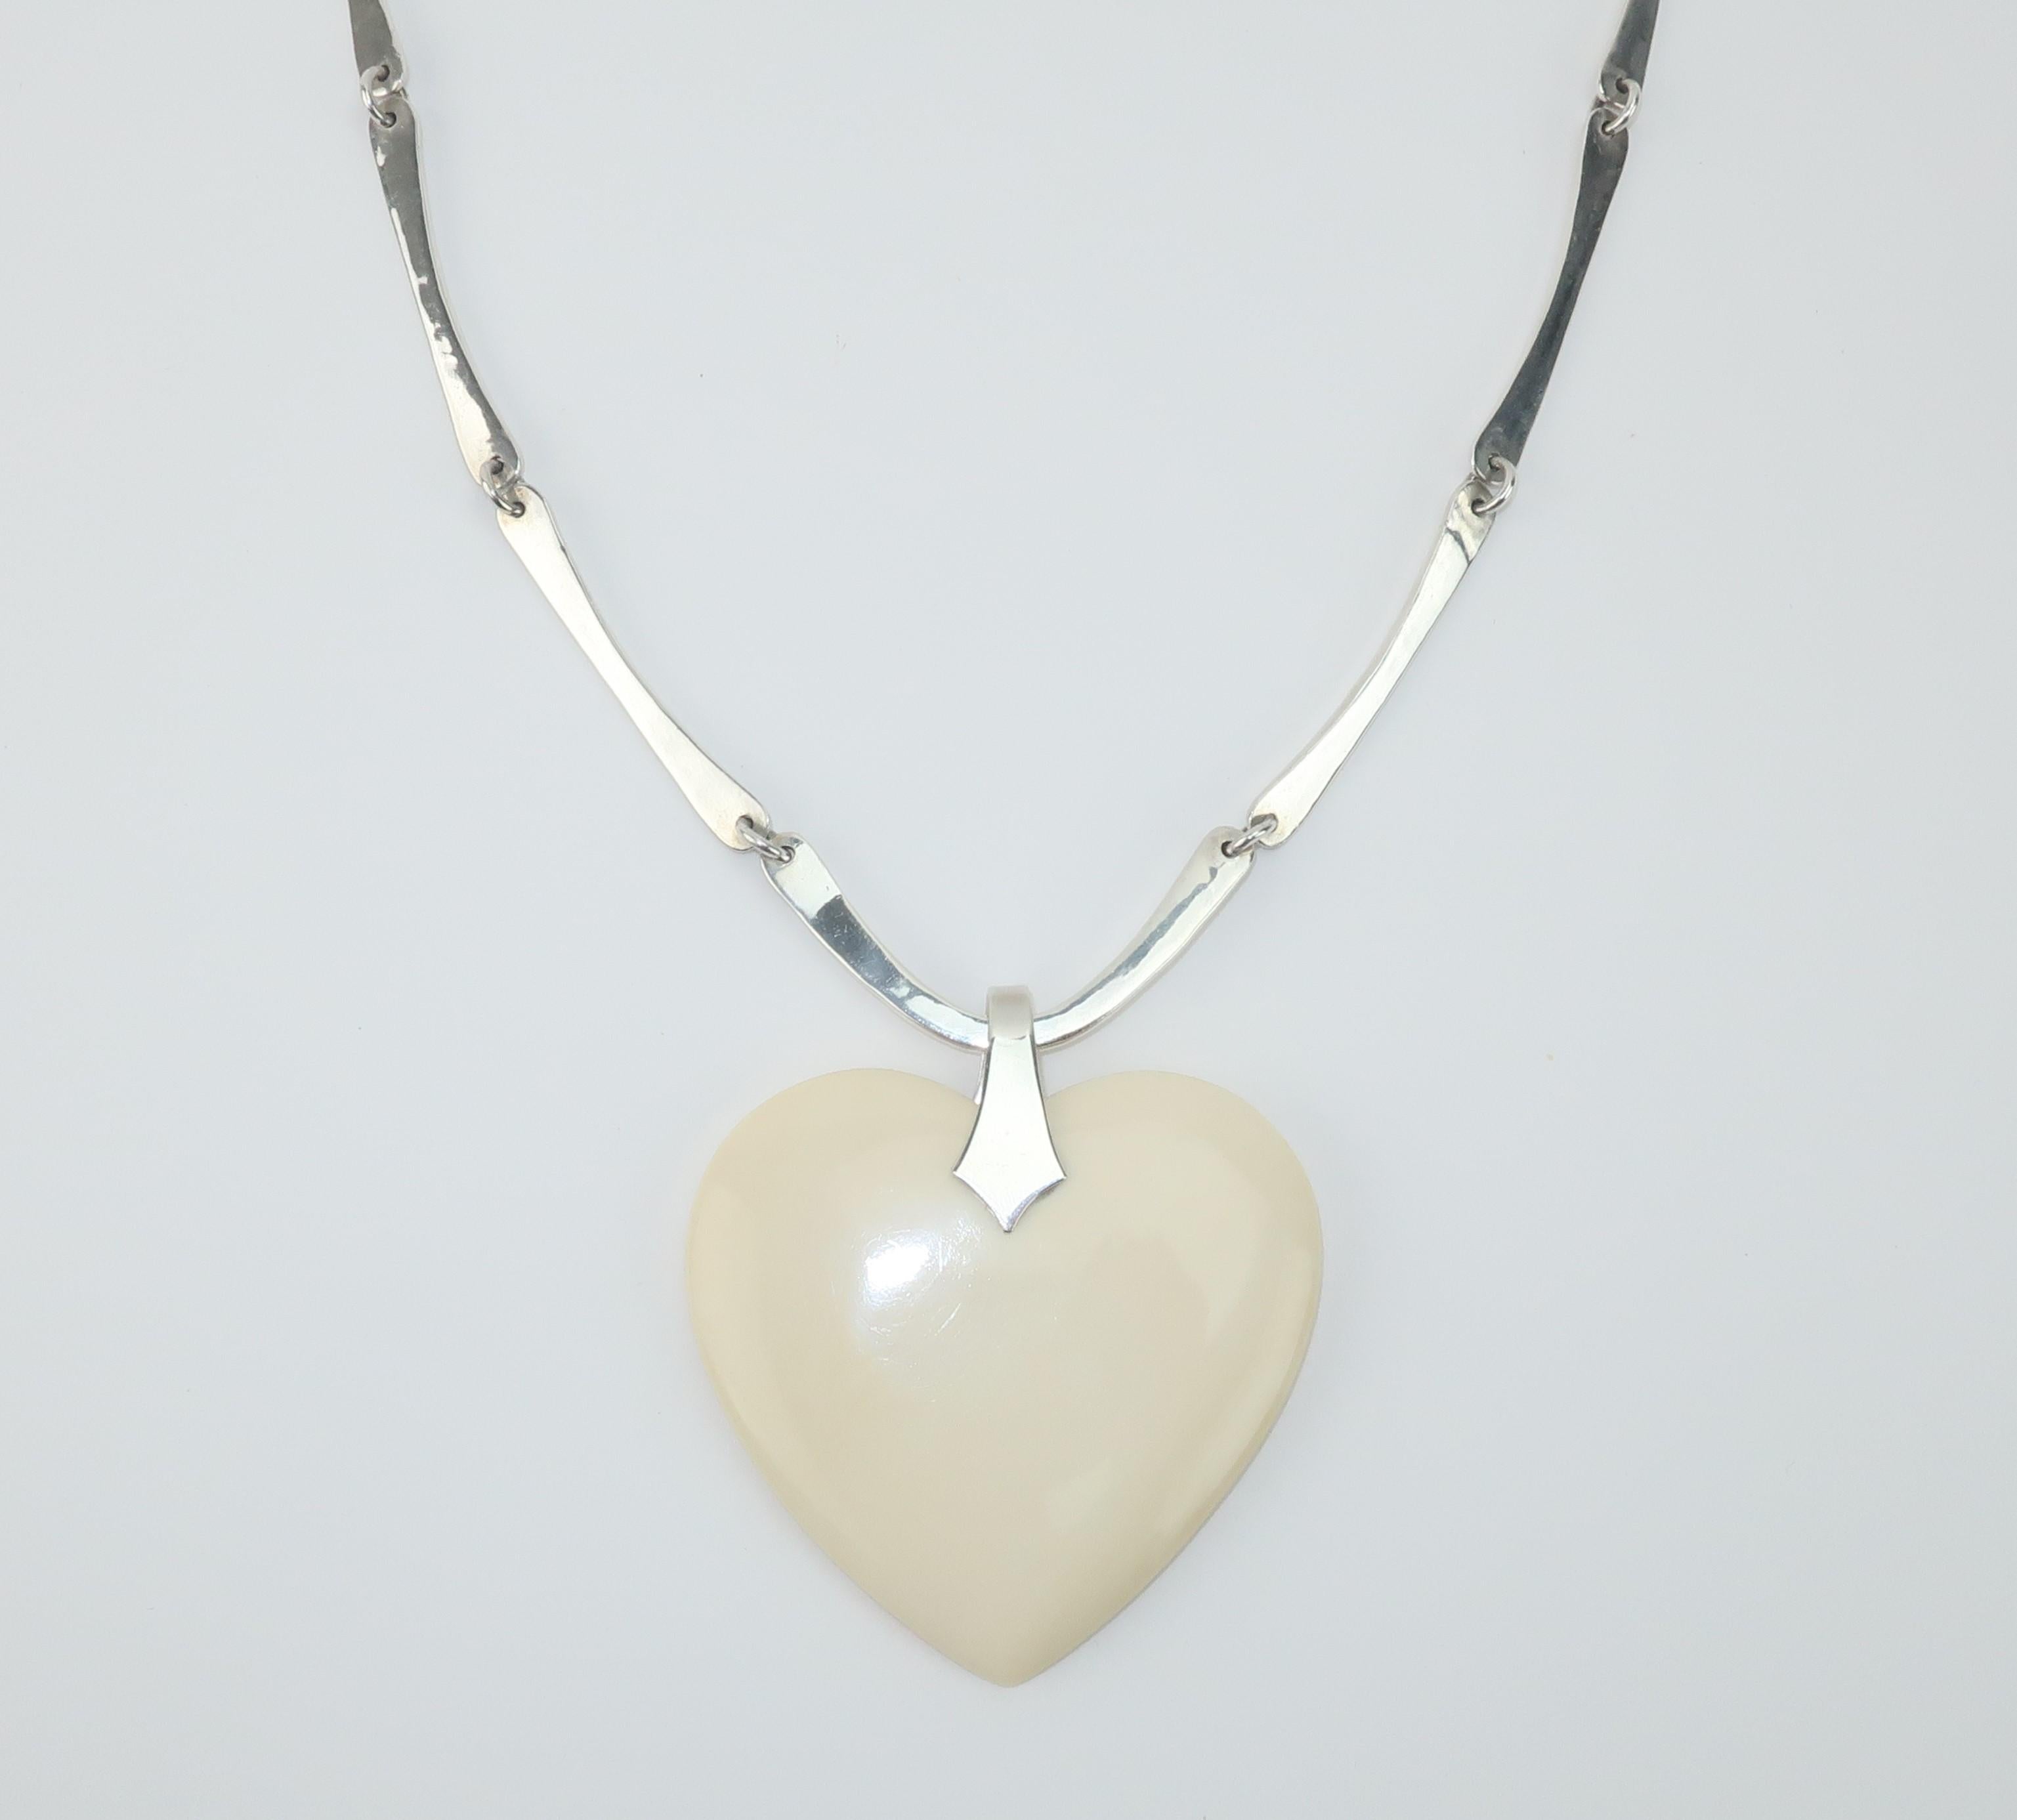 Artisan Jeep Collins Bone Heart Pendant Sterling Silver Necklace, 1970's